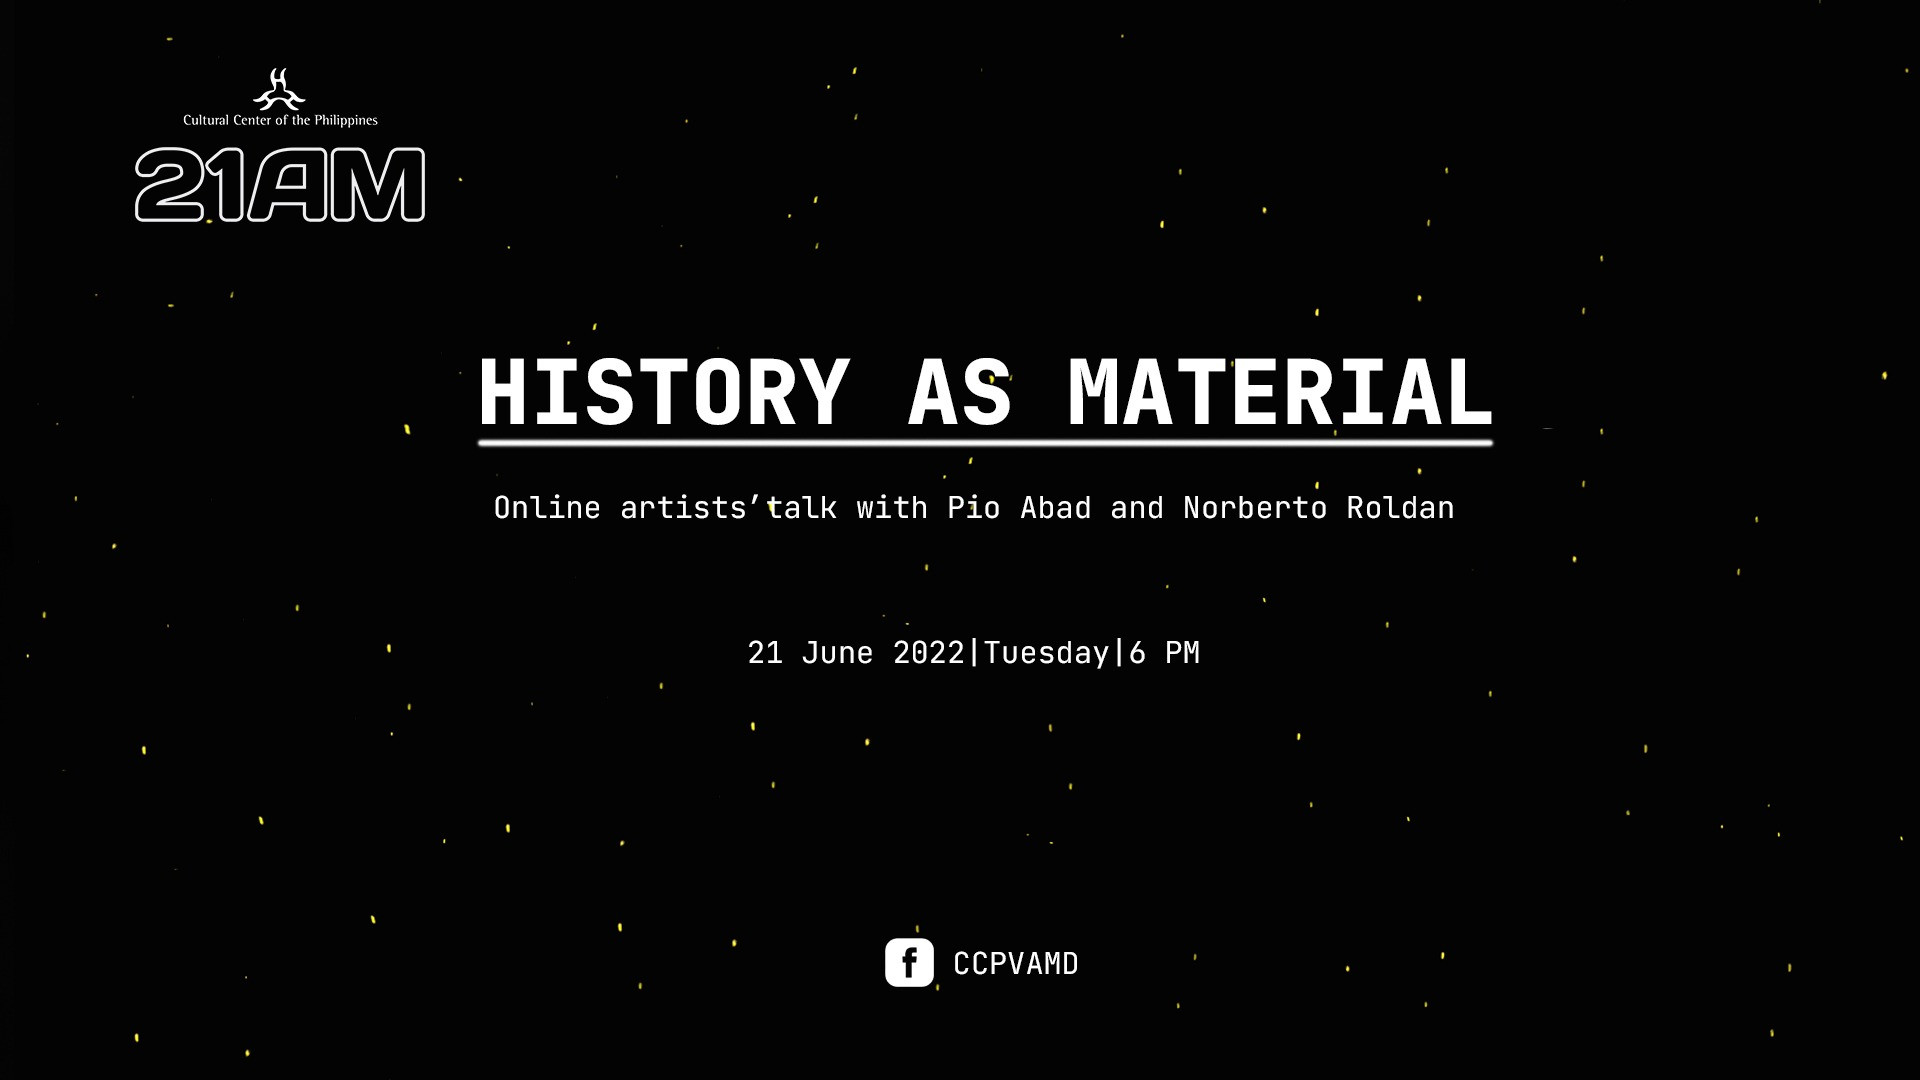 HISTORY AS MATERIAL: Online Artists' Talk with Pio Abad and Norberto Roldan